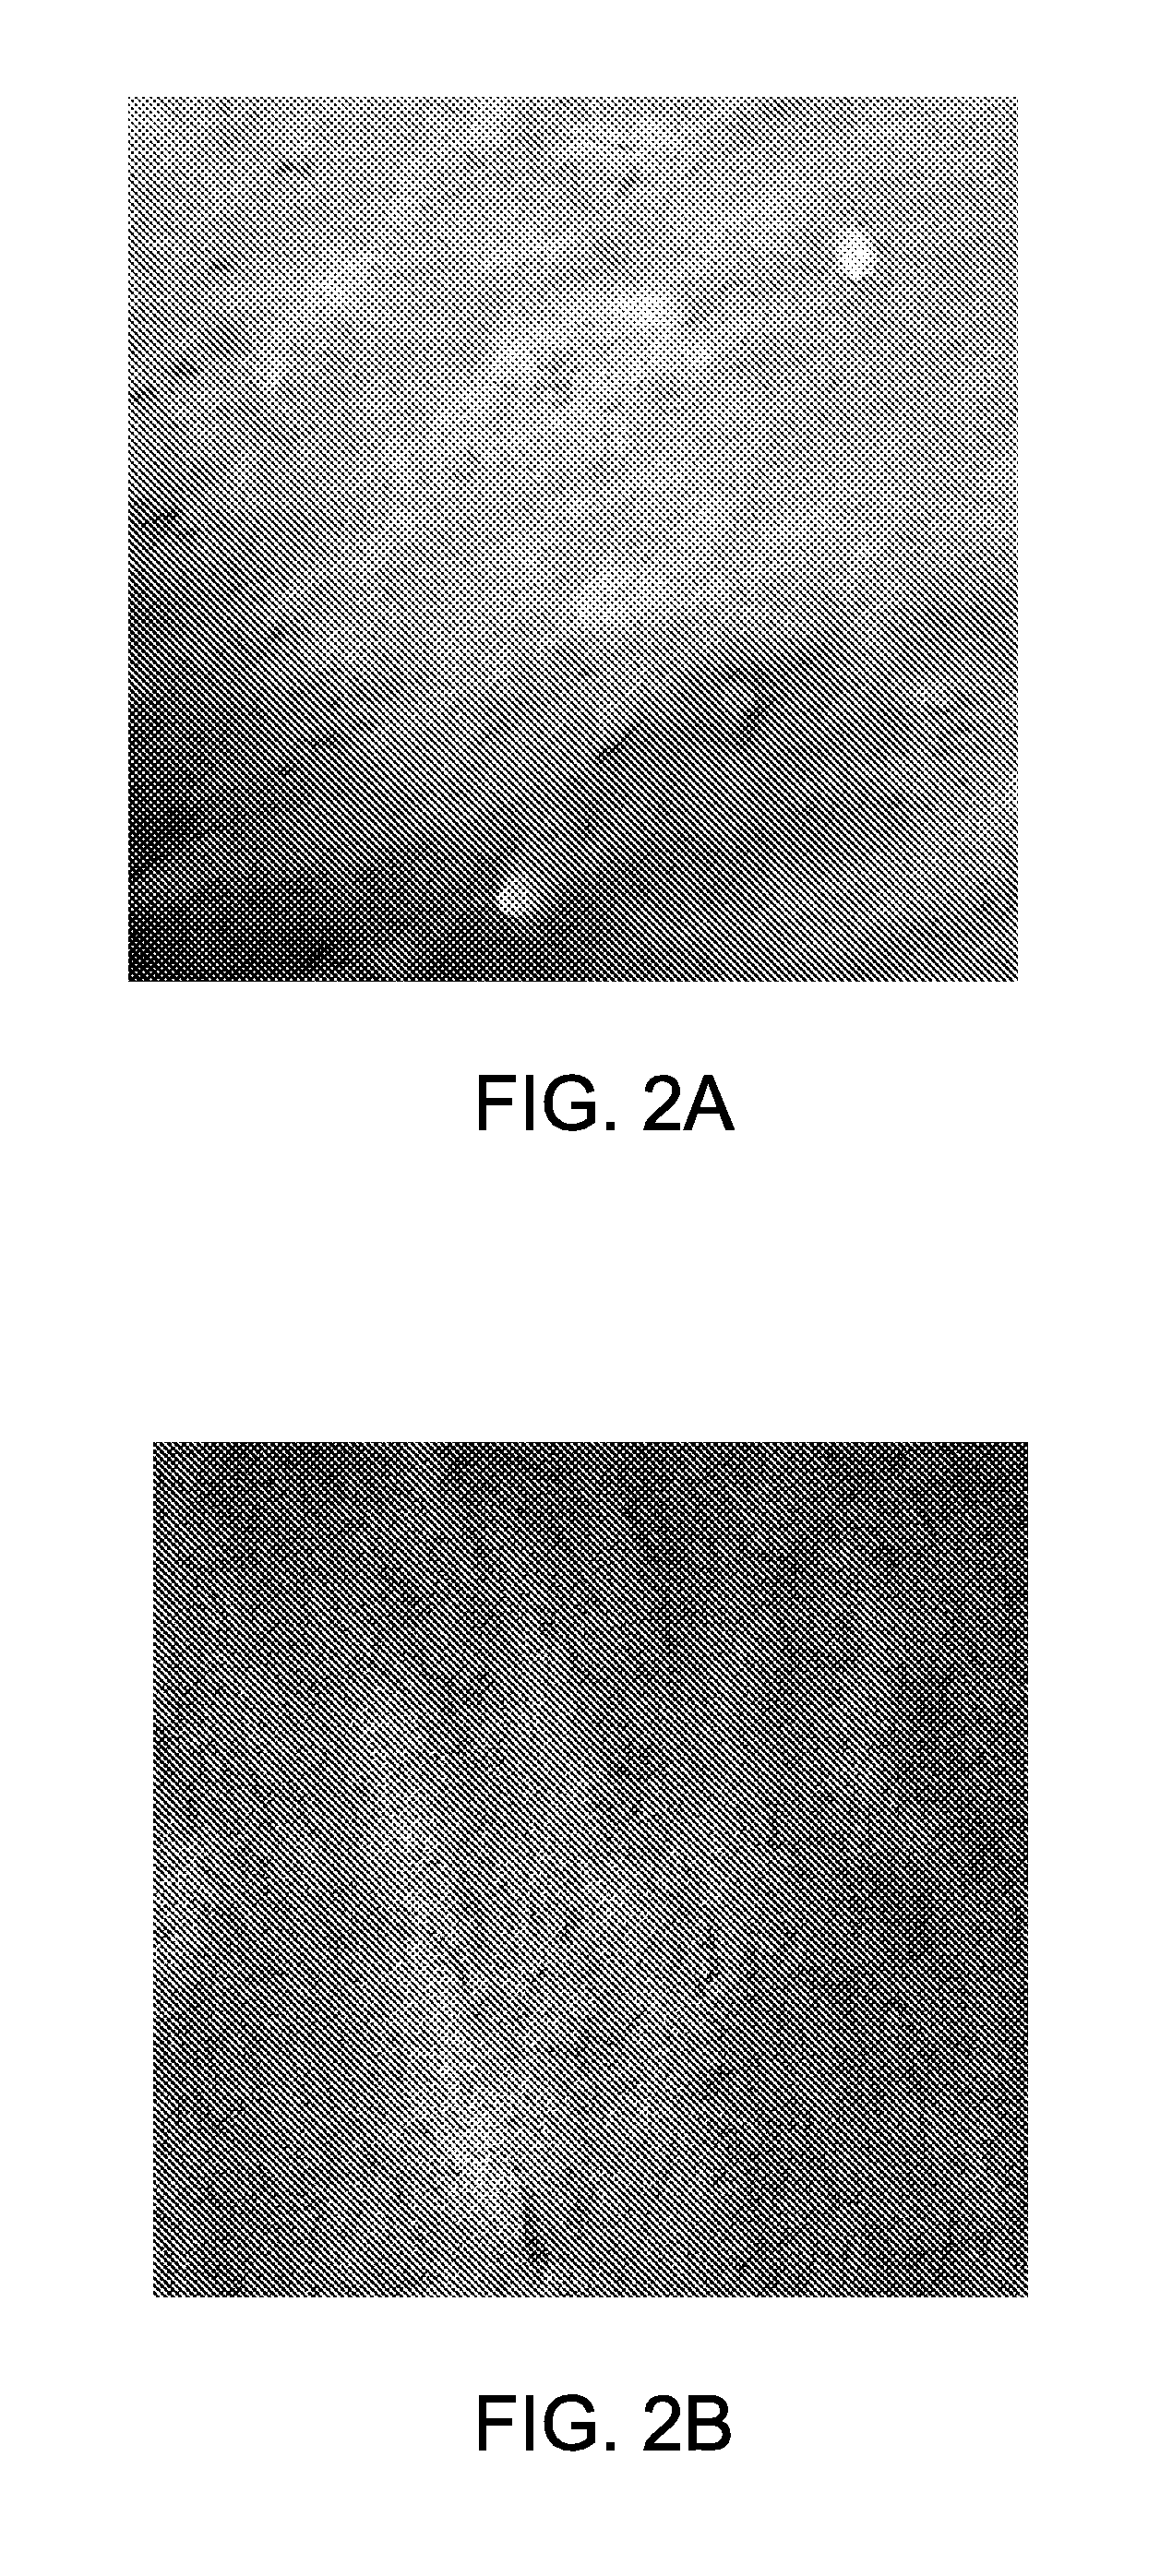 Block copolymer membranes and associated methods for making the same